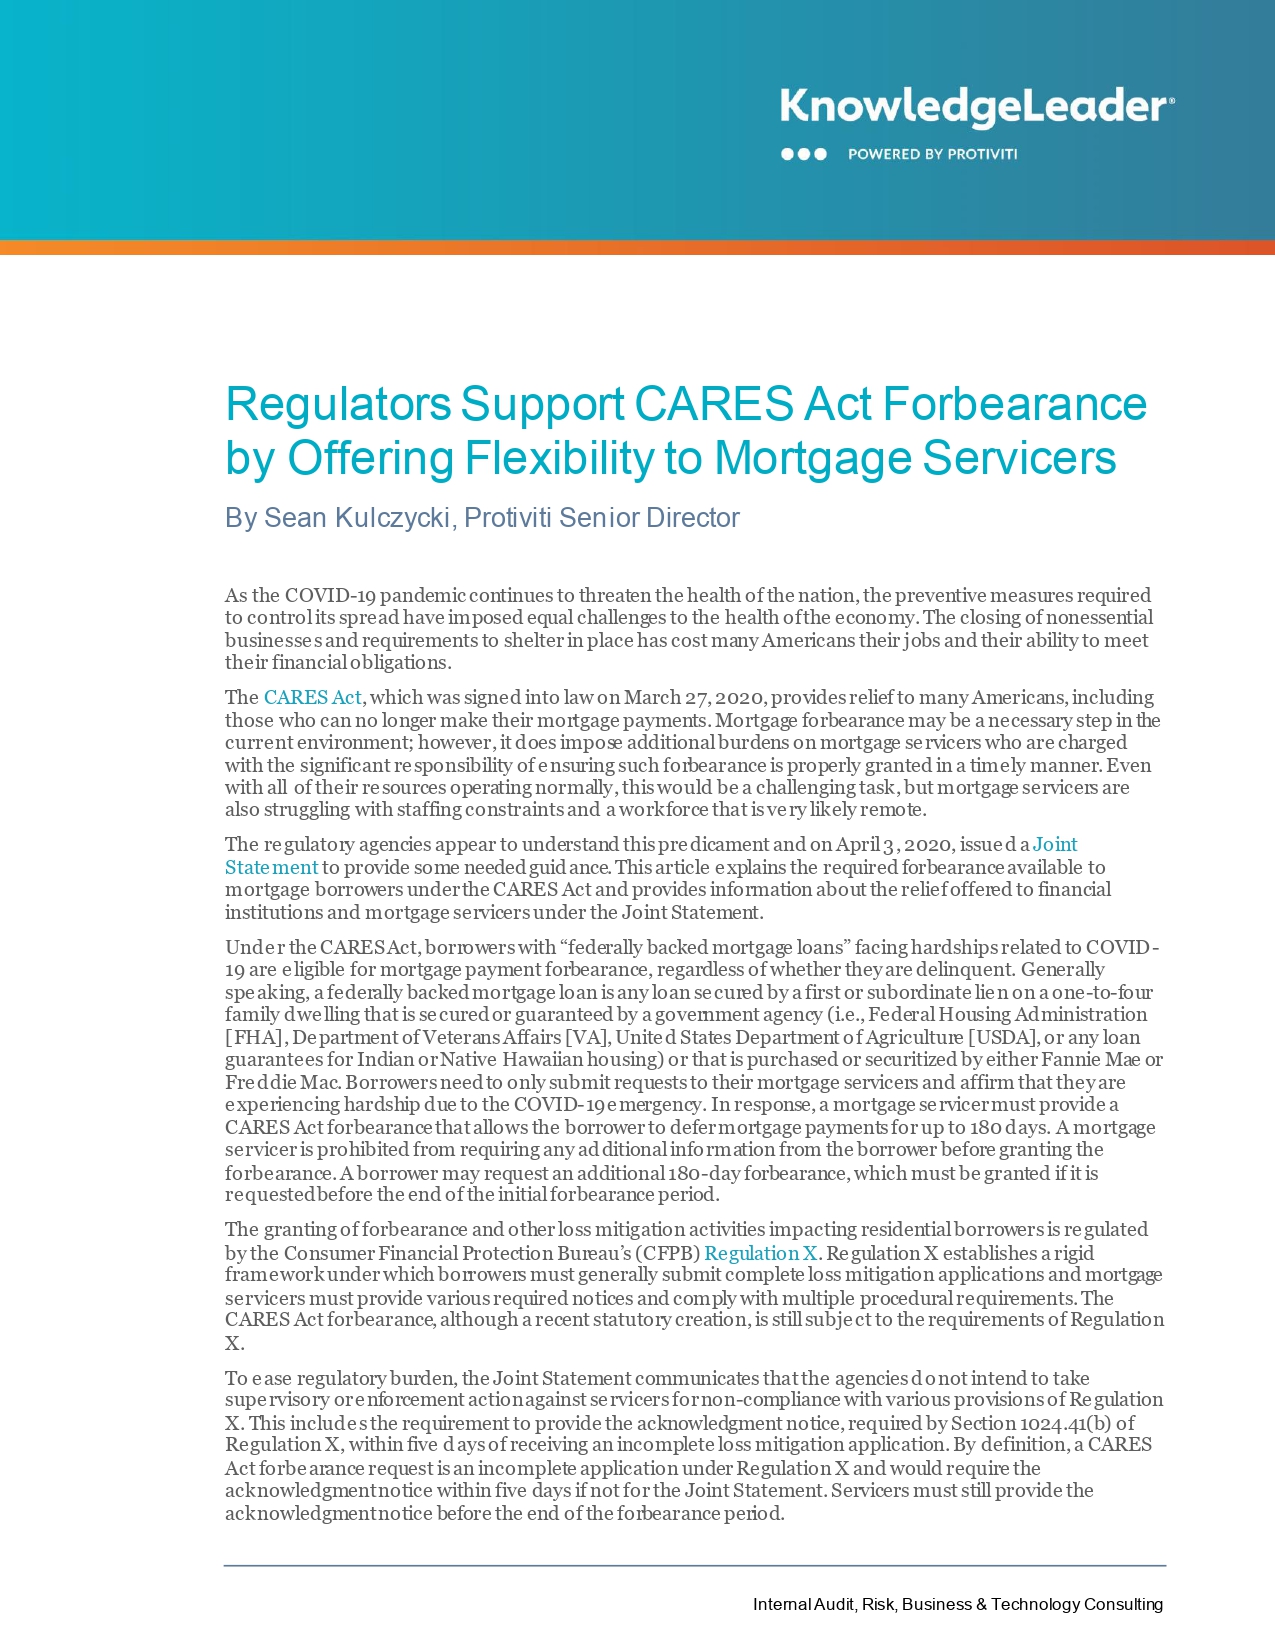 Regulators Support CARES Act Forbearance by Offering Flexibility to Mortgage Servicers